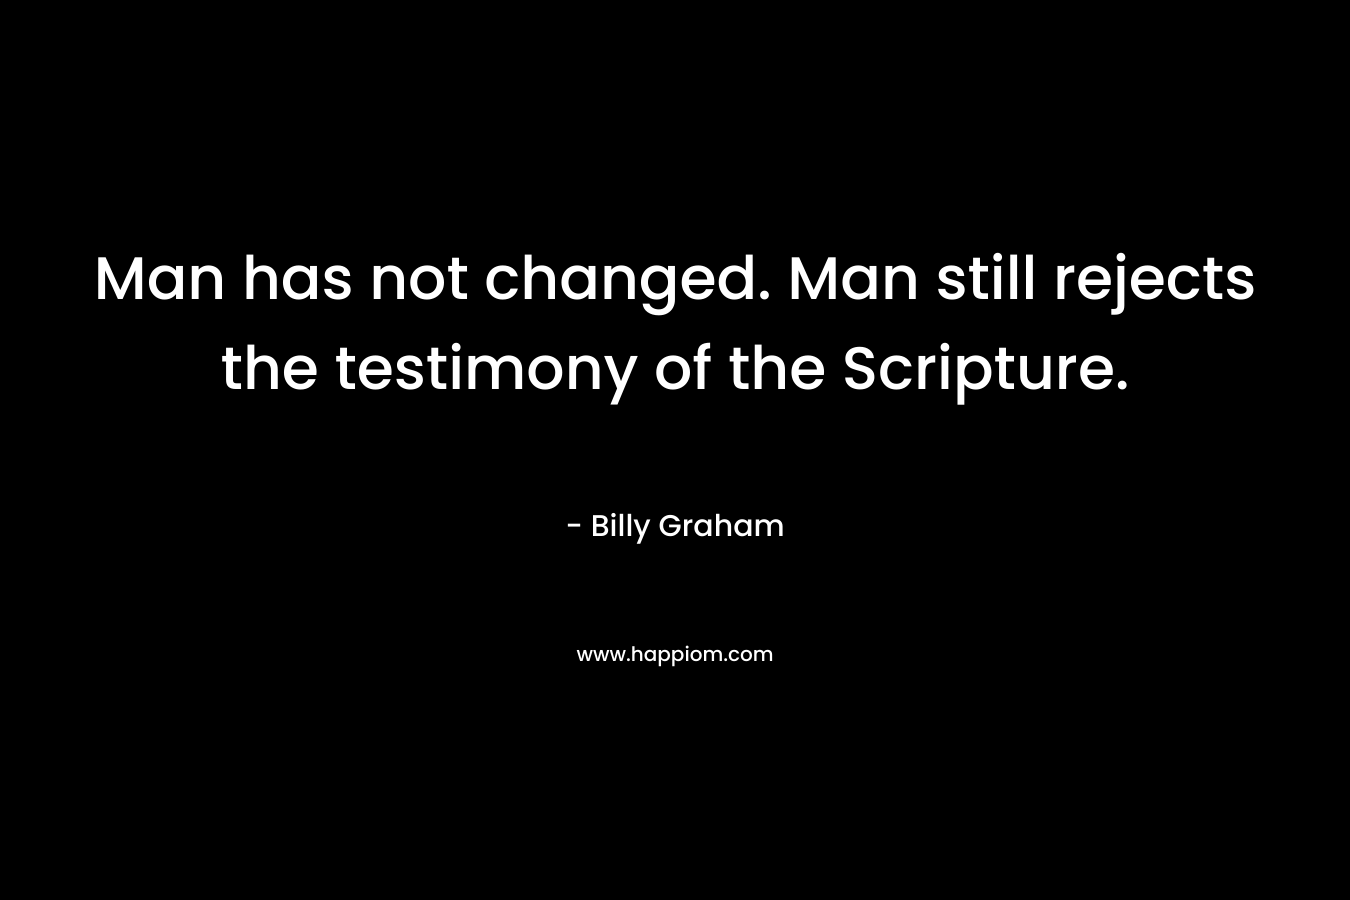 Man has not changed. Man still rejects the testimony of the Scripture.